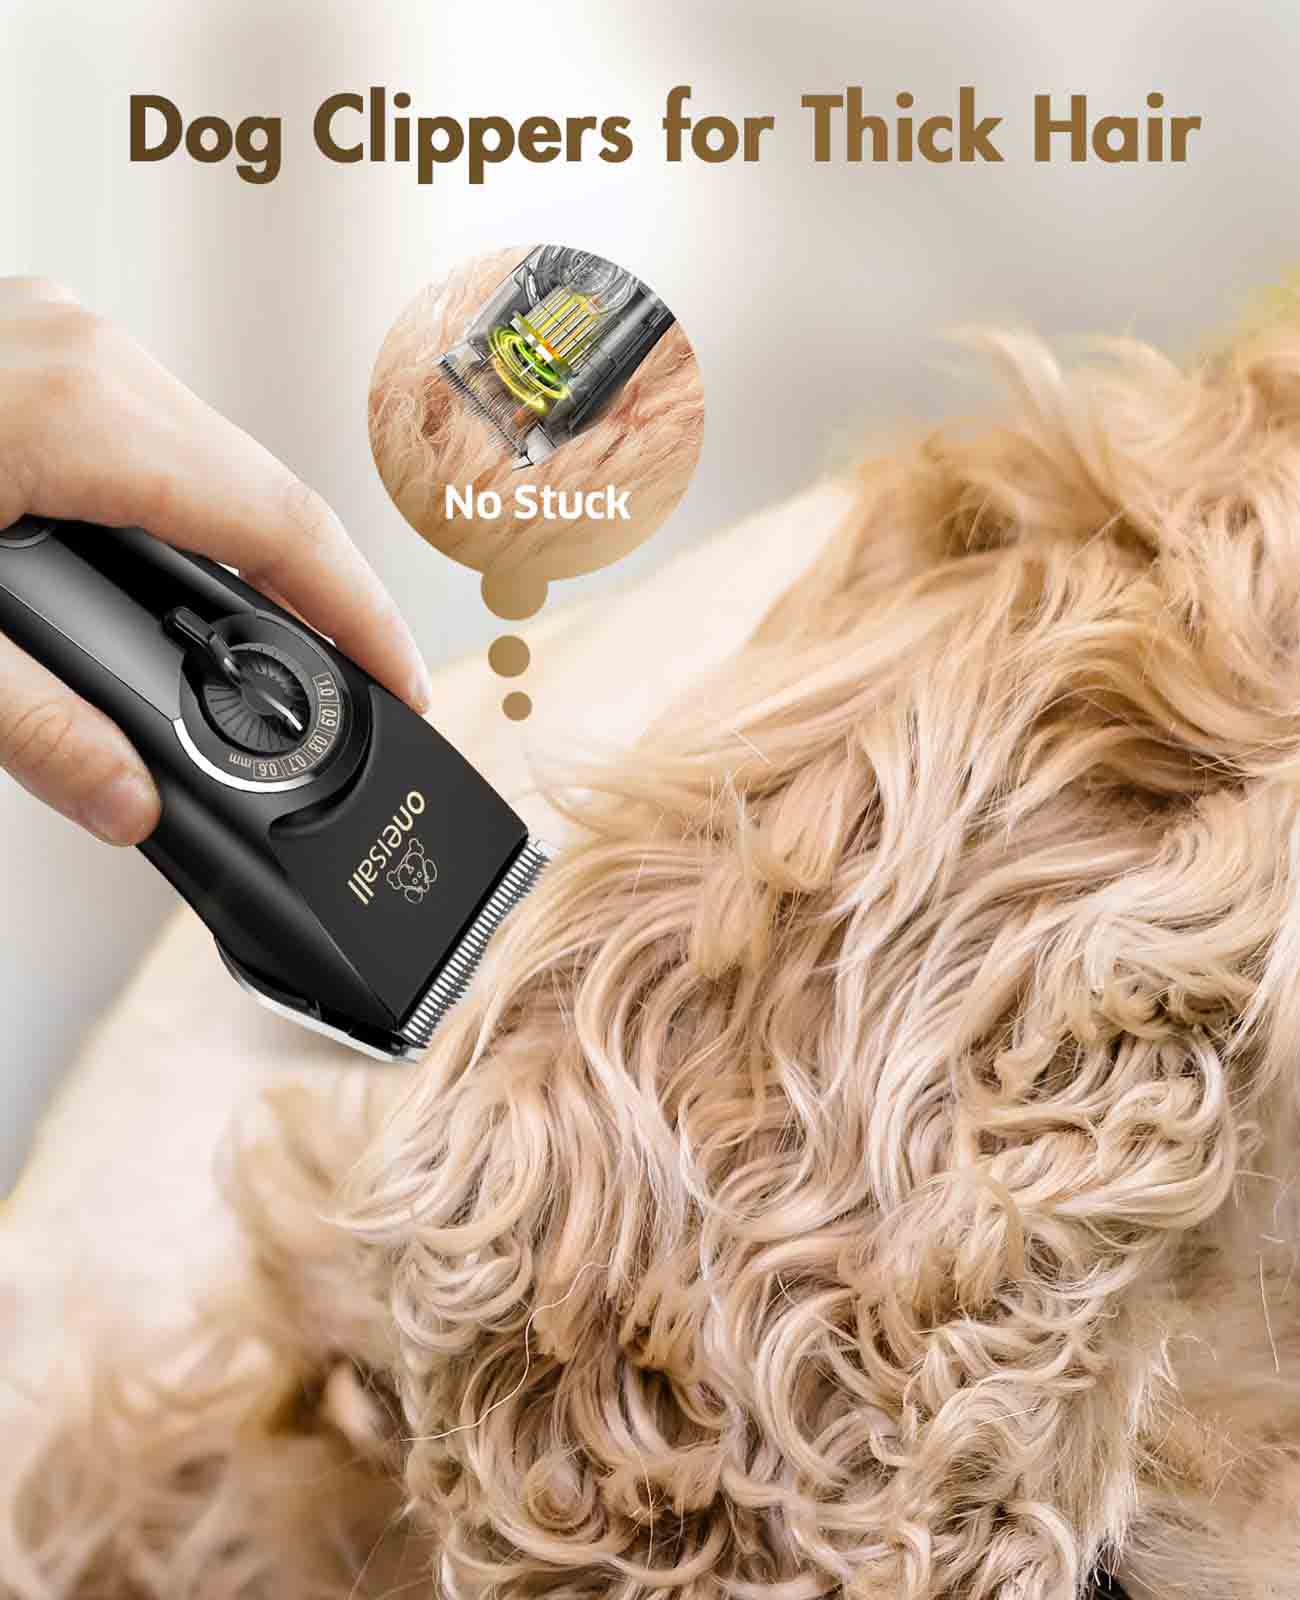 
                  
                    CP 9050 - Oneisall Dog Clippers
                  
                